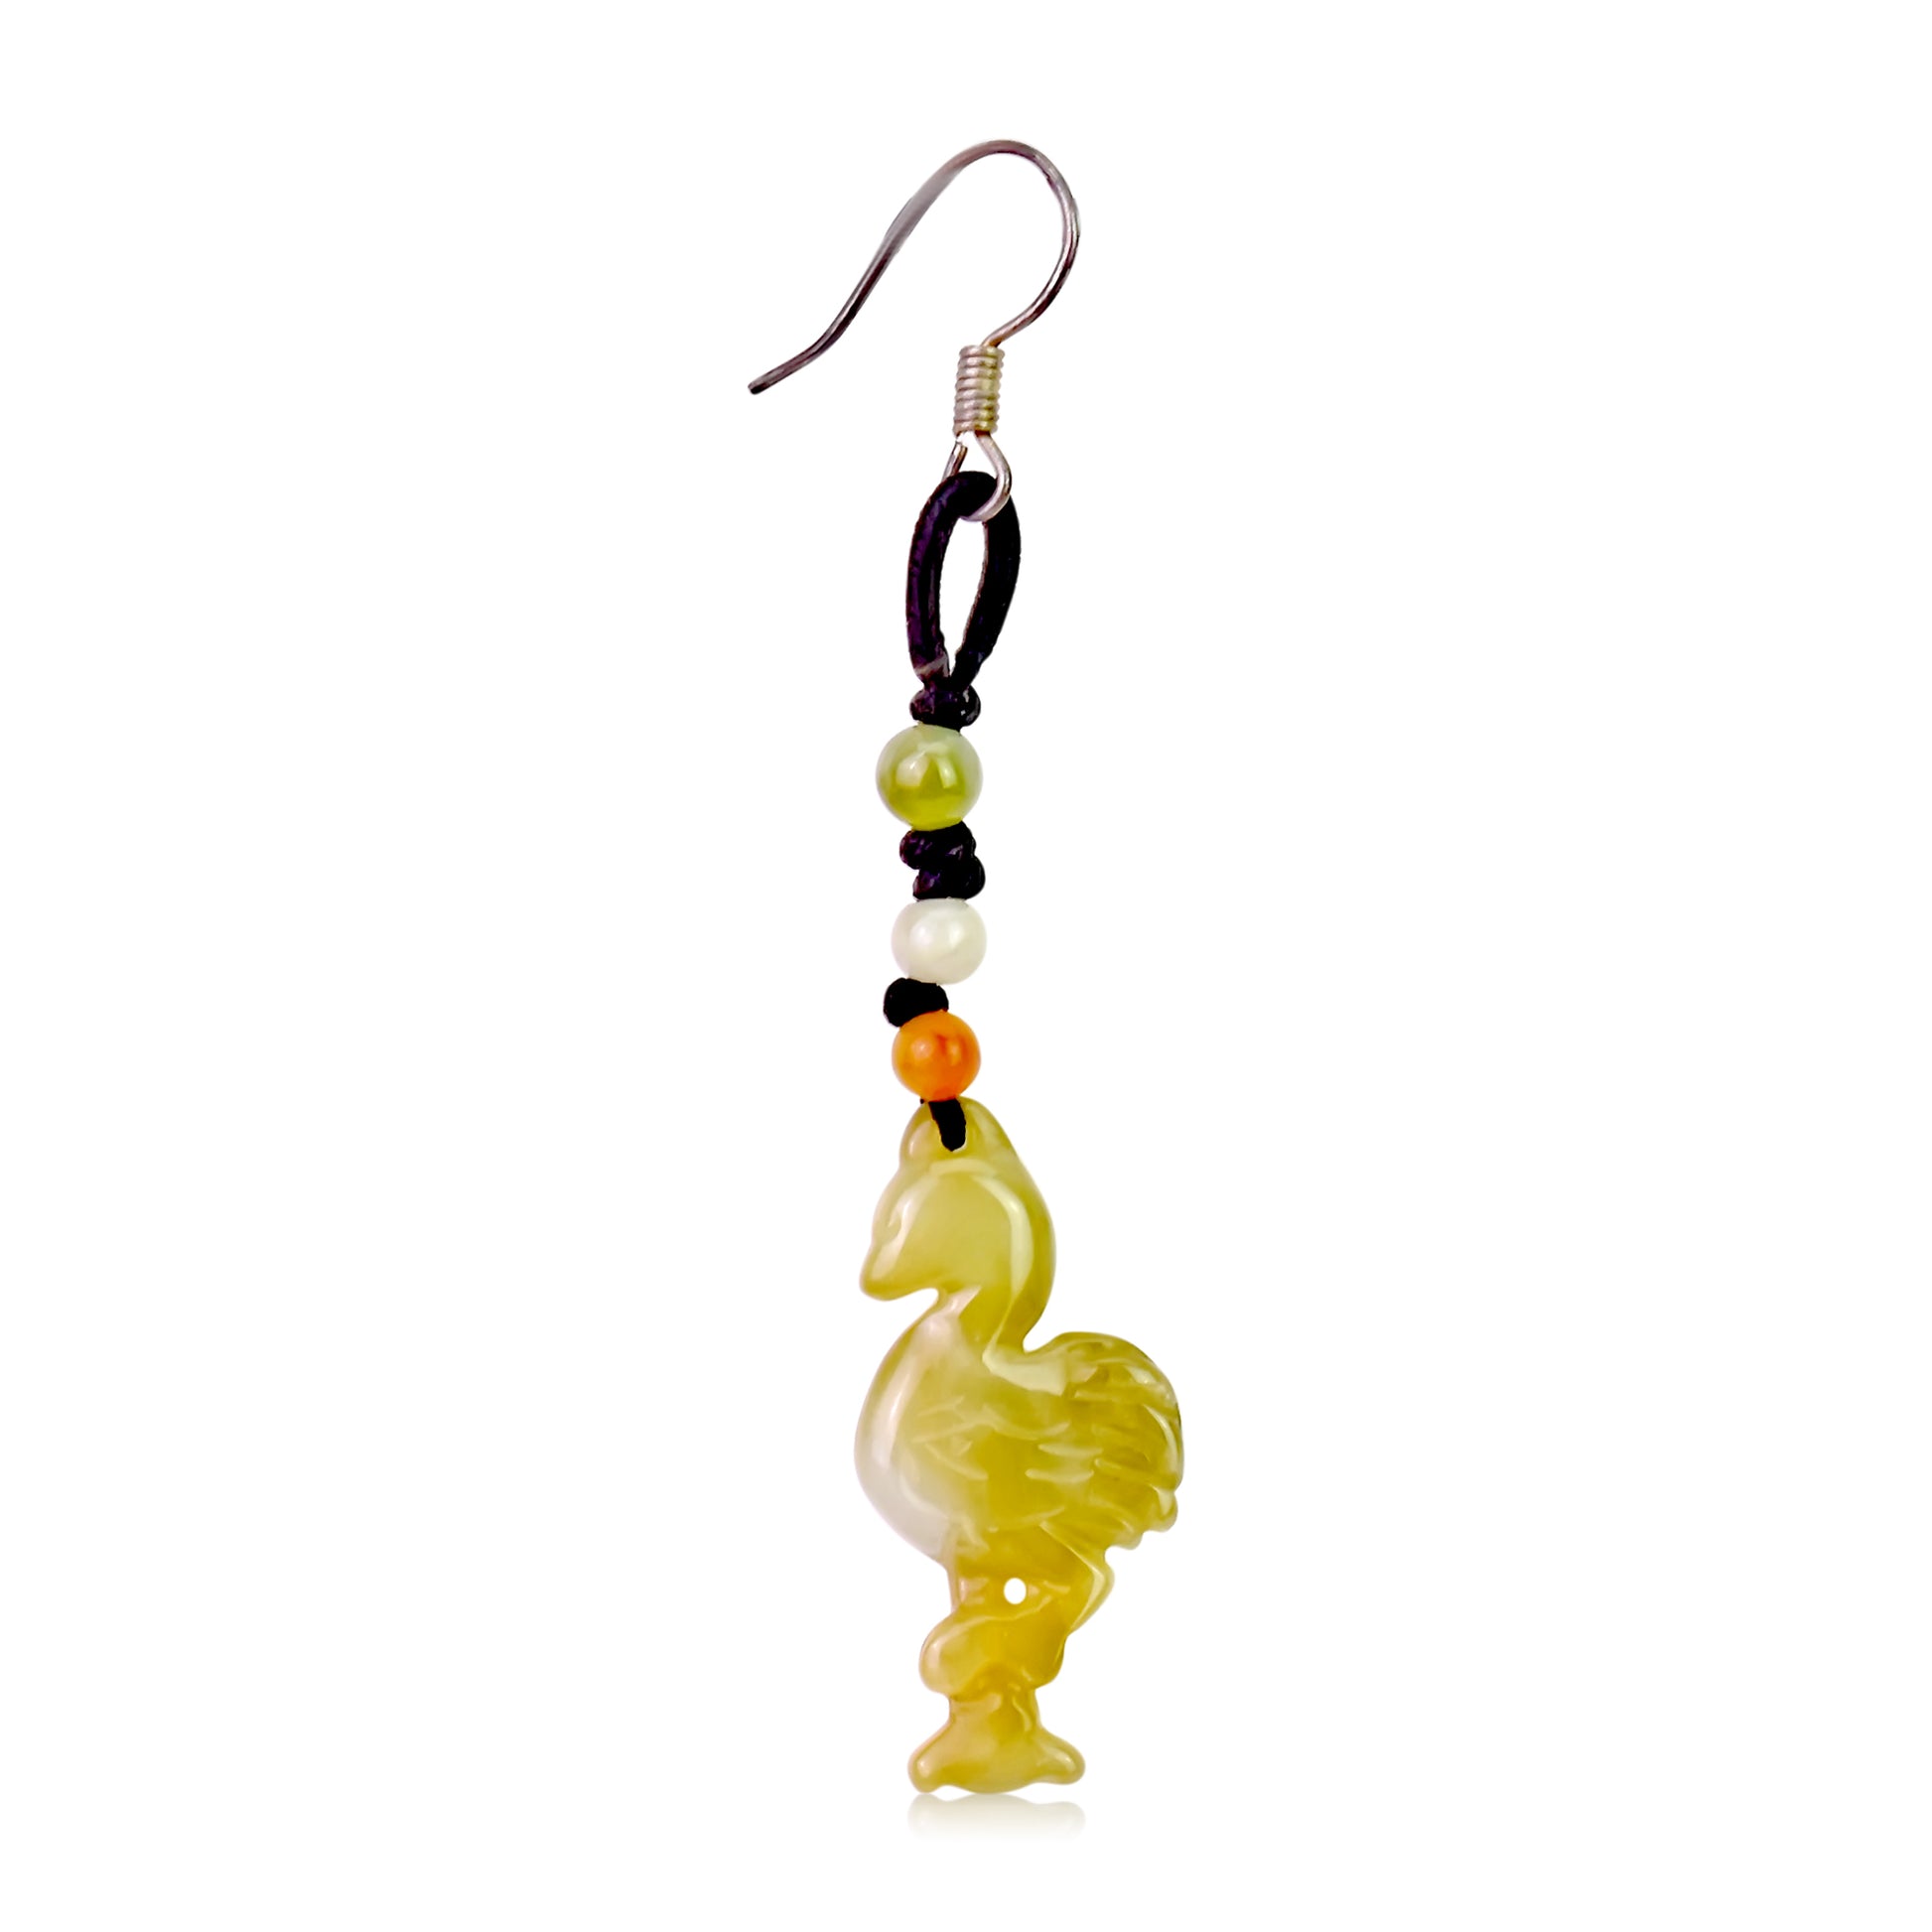 Feel Unique and Beautiful with Flamingo Handmade Jade Earrings made with Black Cord